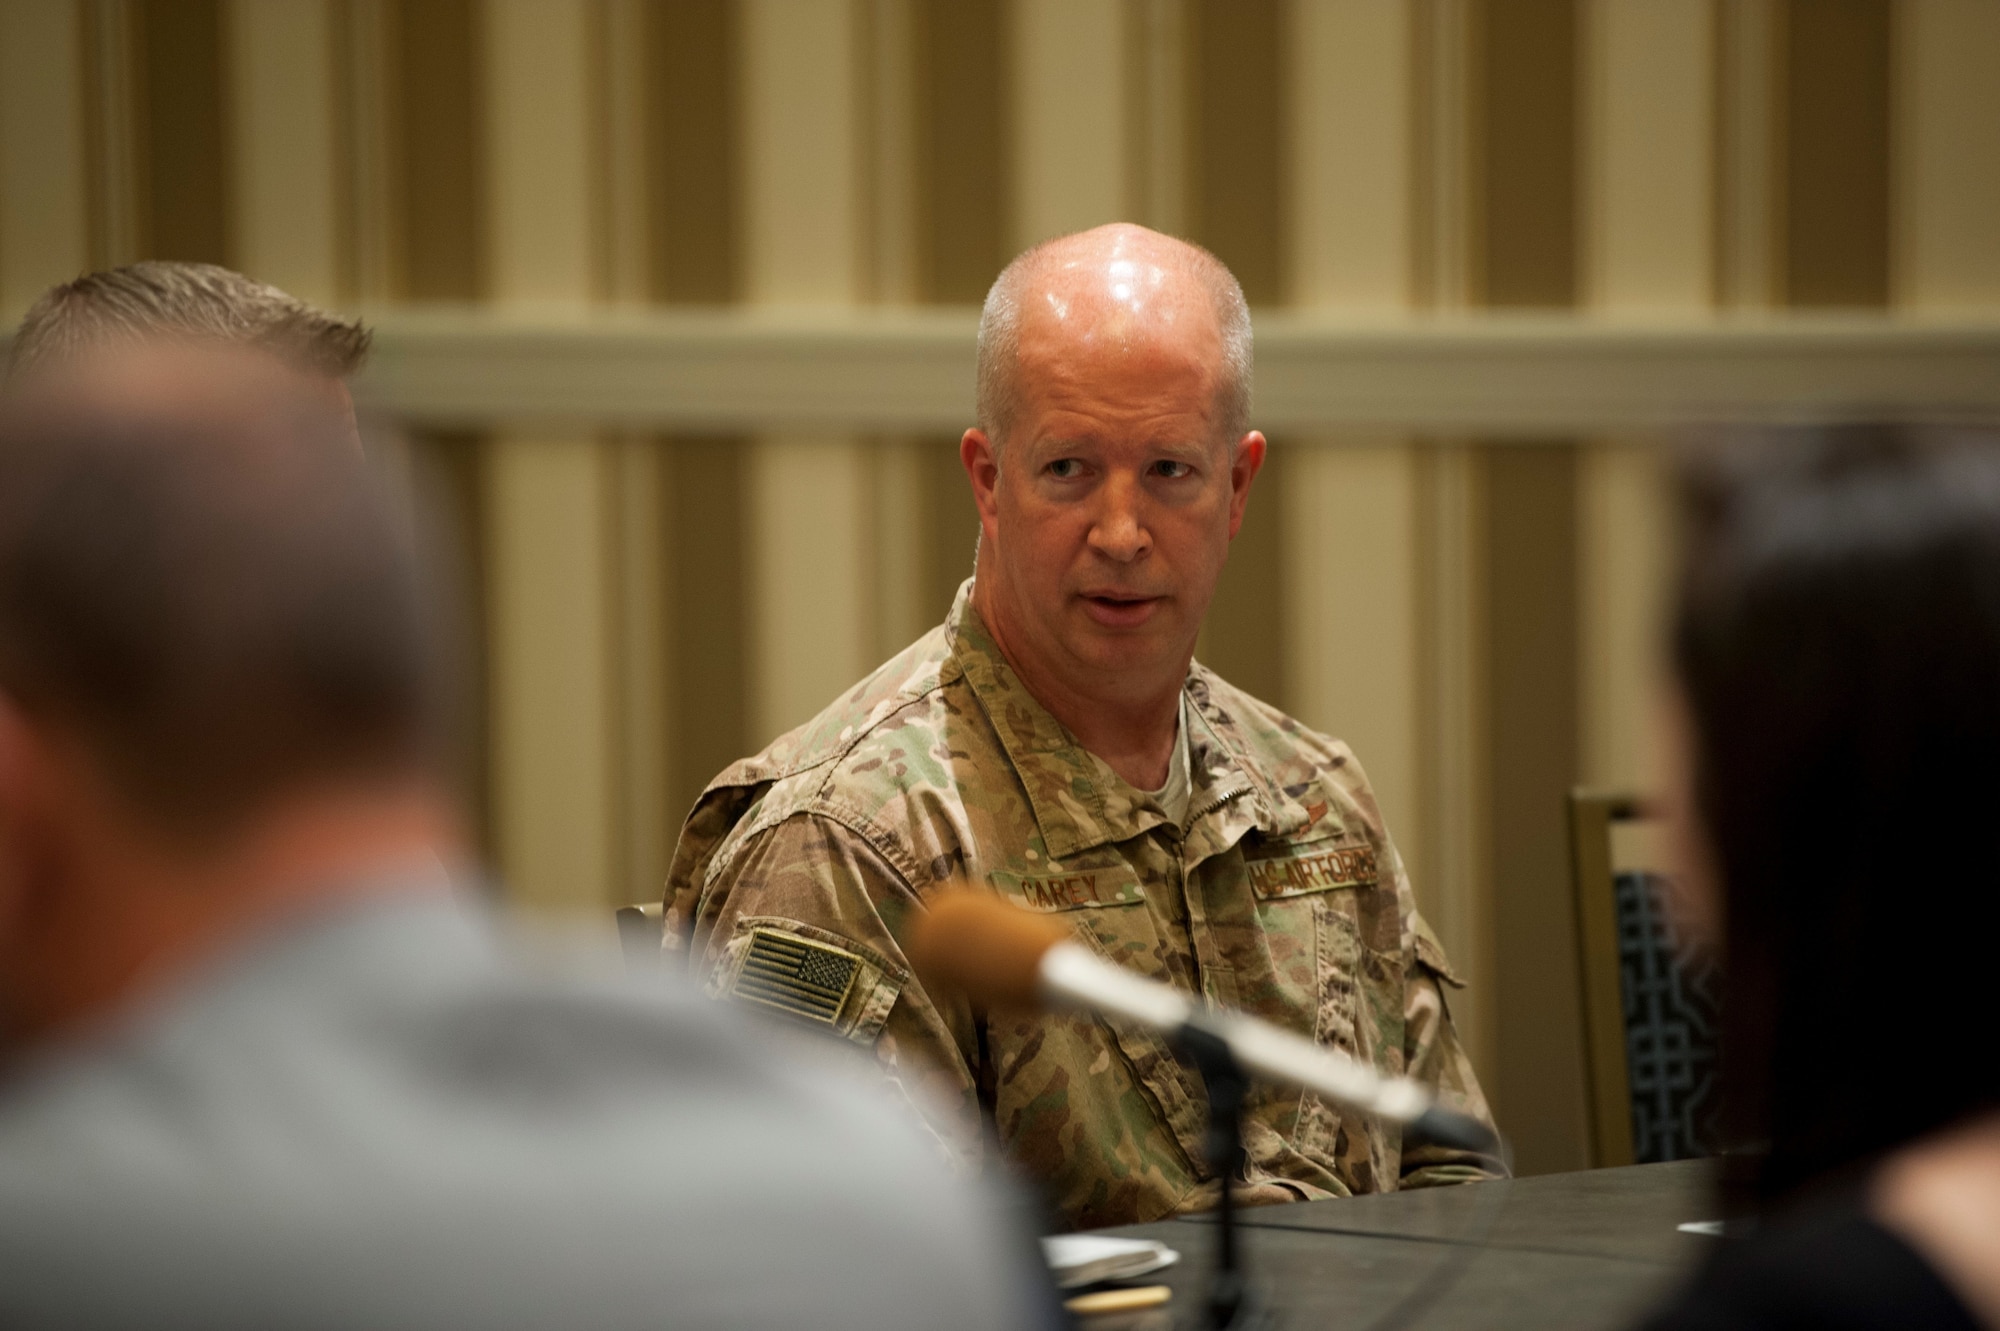 Brig. Gen. Joel Carey, 18th Wing commander at Kadena Air Base, Japan, addresses a question during a media roundtable at the Gaylord National Resort and Convention Center in National Harbor, Md., Sept. 17, 2019. Wing commanders from across Pacific Air Forces participated in the roundtable during the 2019 Air Force Association’s Air Space and Cyber Conference. (U.S. Air Force photo by Staff Sgt. Mikaley Kline)